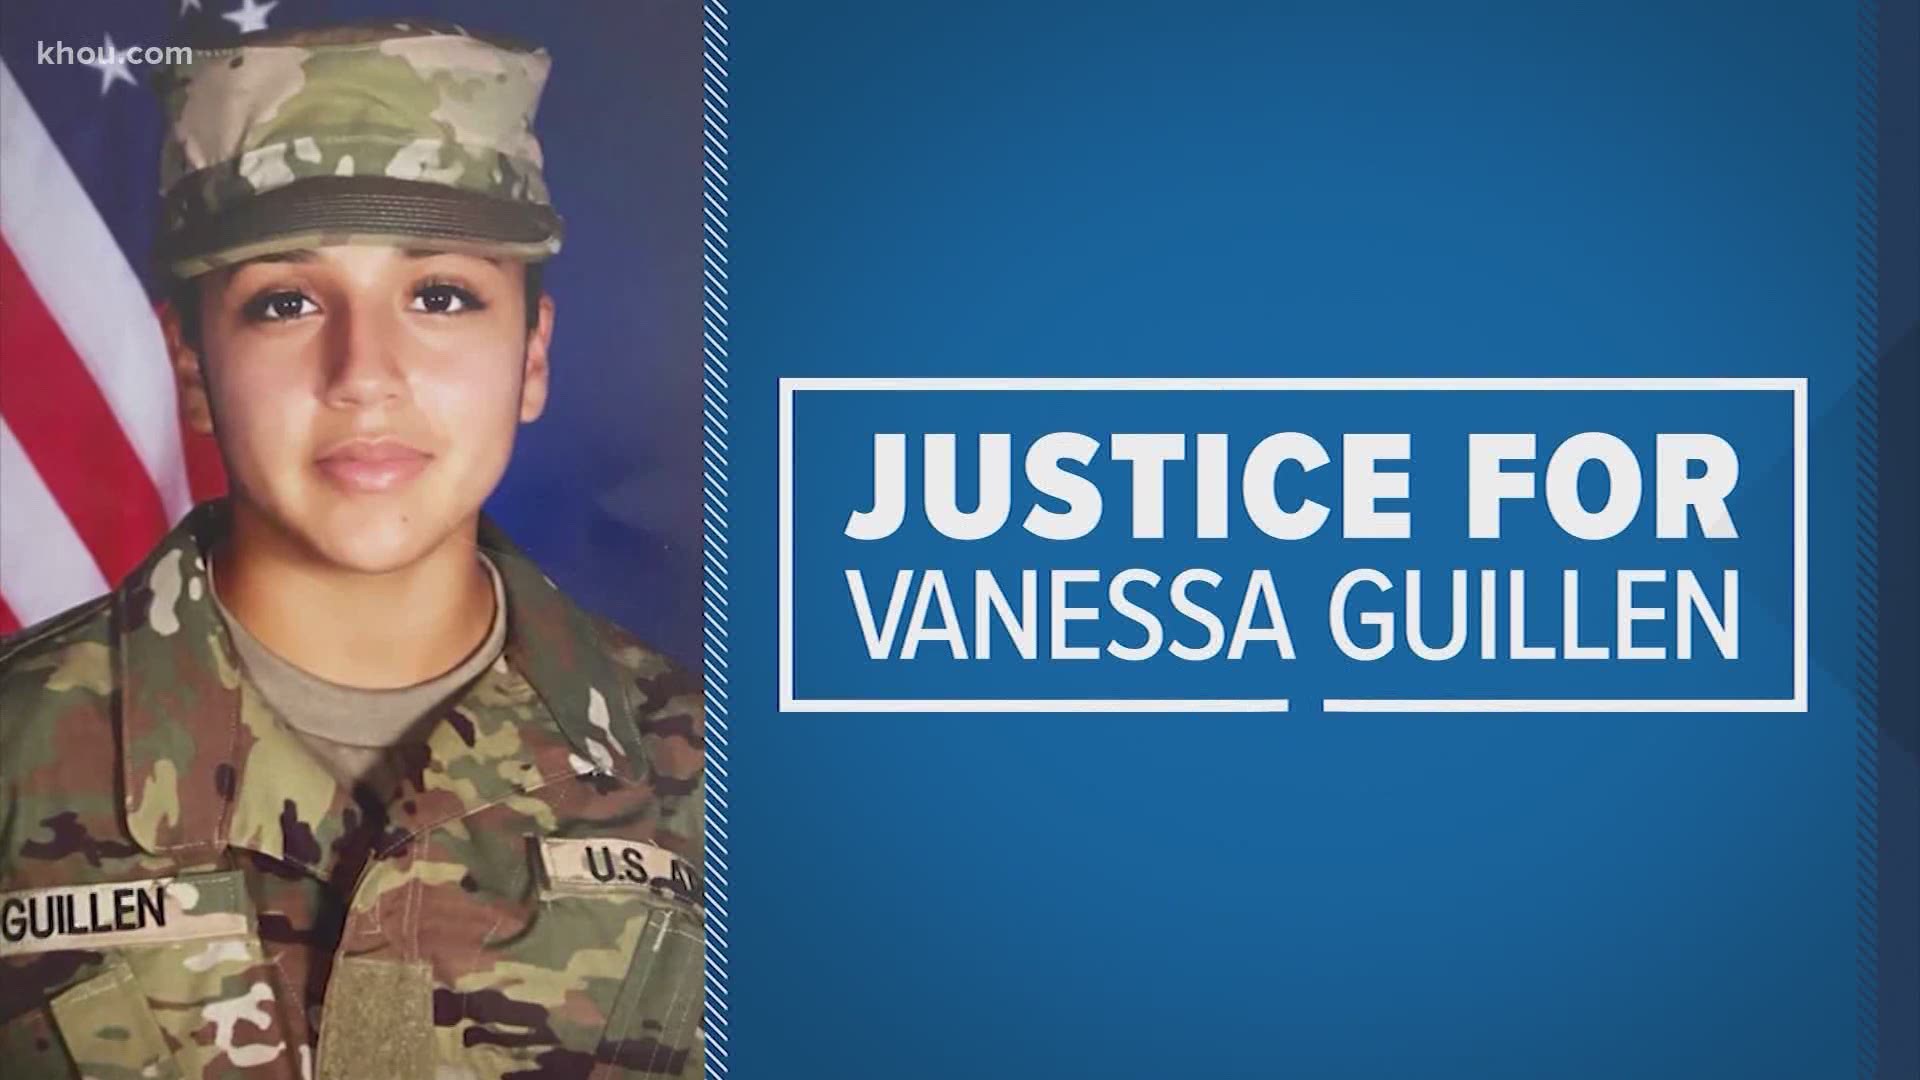 The family of Vanessa Guillen is calling for Congress to take action after independent review of Fort Hood results in several fires and policy changes.